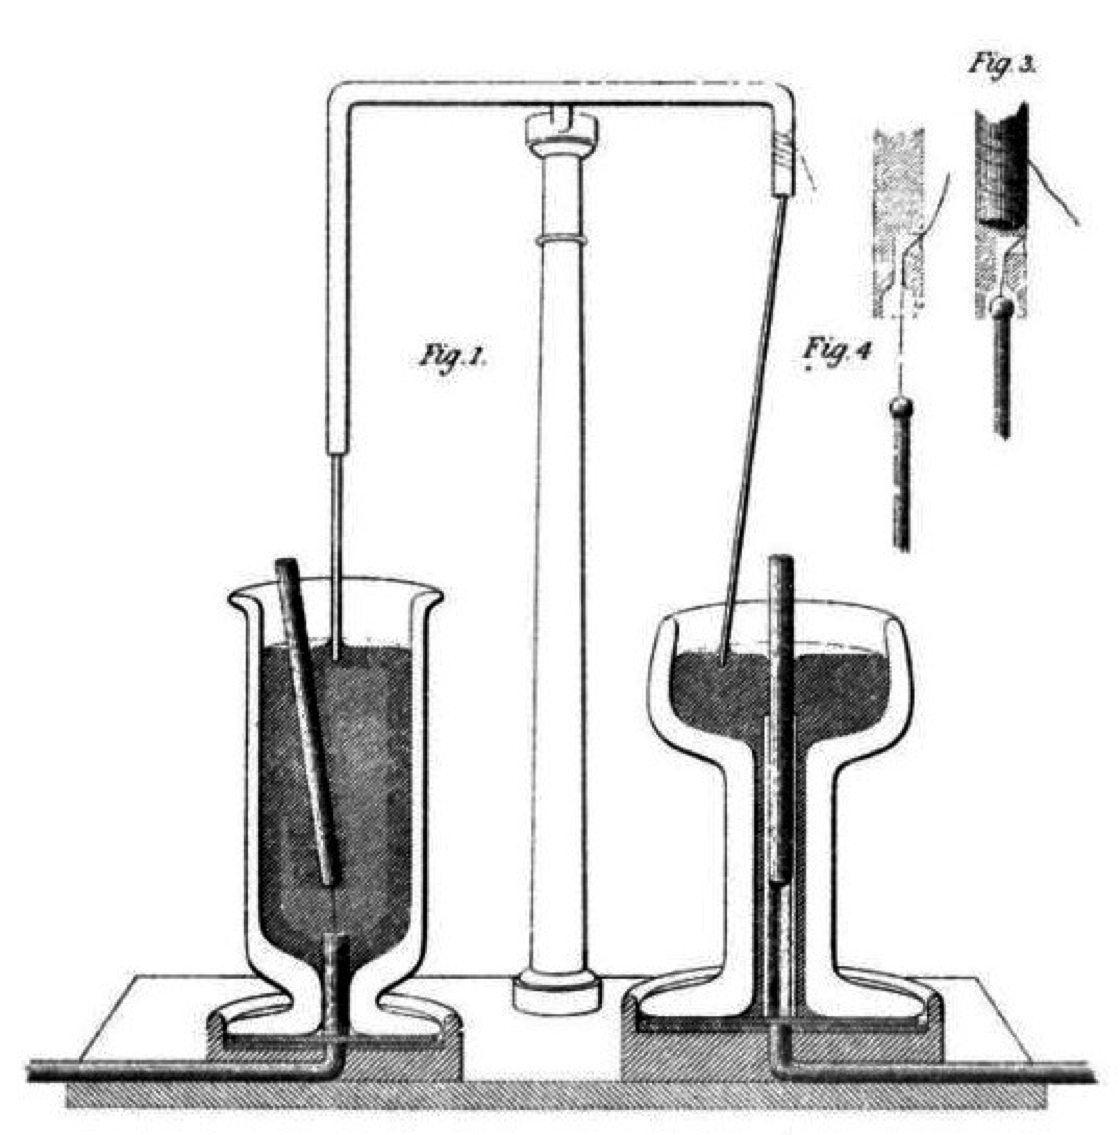 The heavy black cylinder standing up from the bottom of the beaker of mercury is a bar magnet while the slender wire hanging from the top is carries a current.